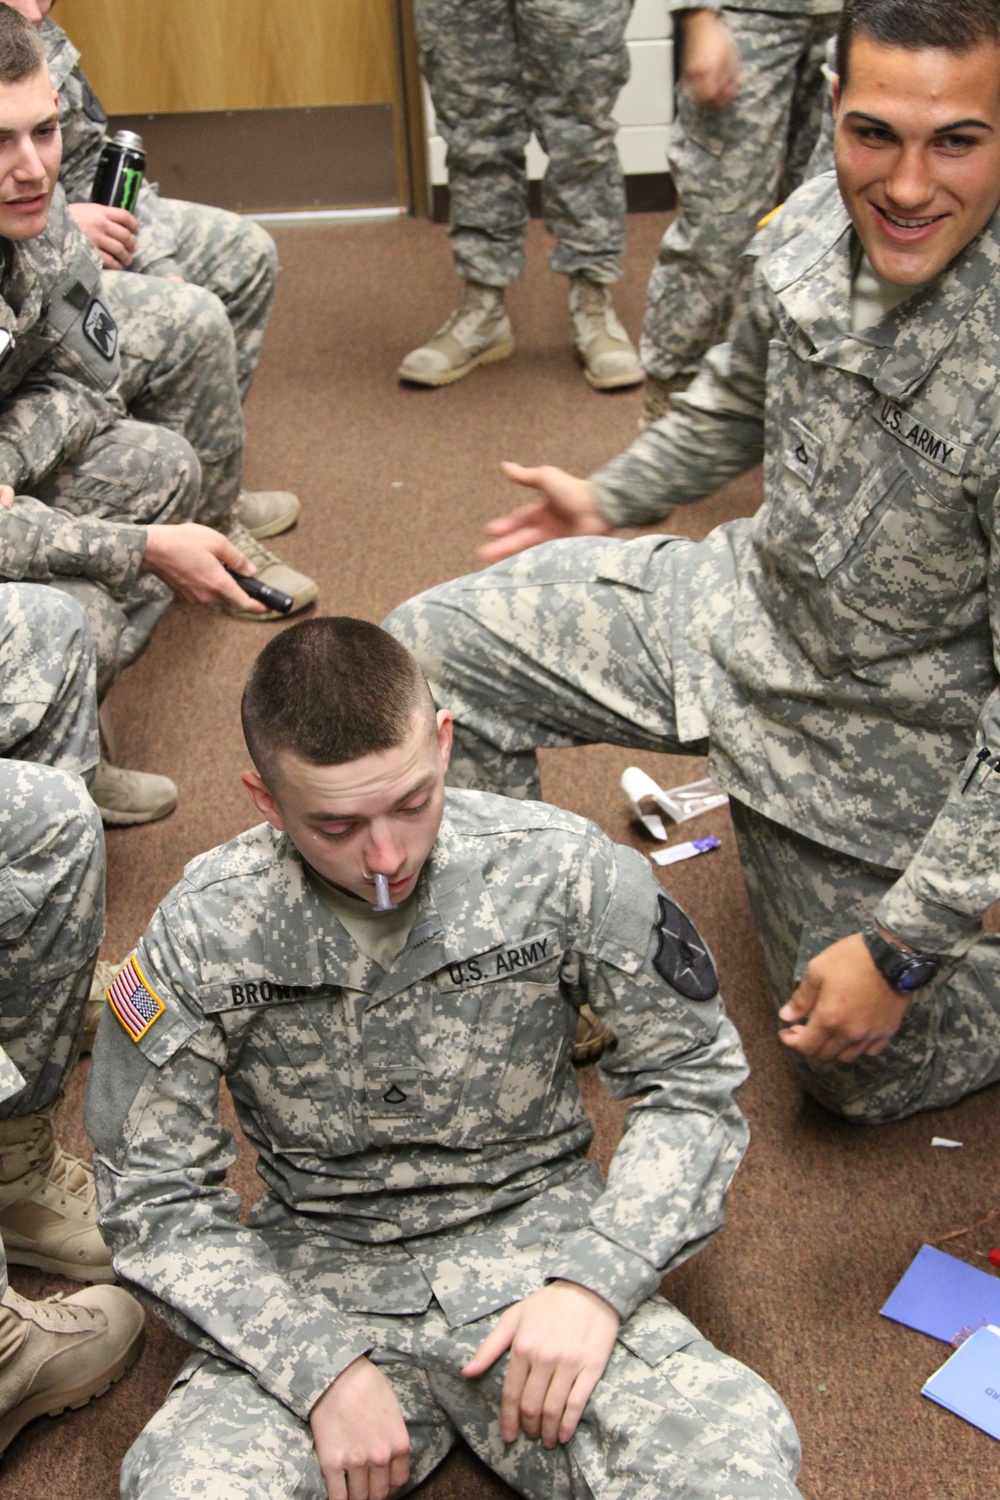 Aviation soldiers learn lifesaving techniques